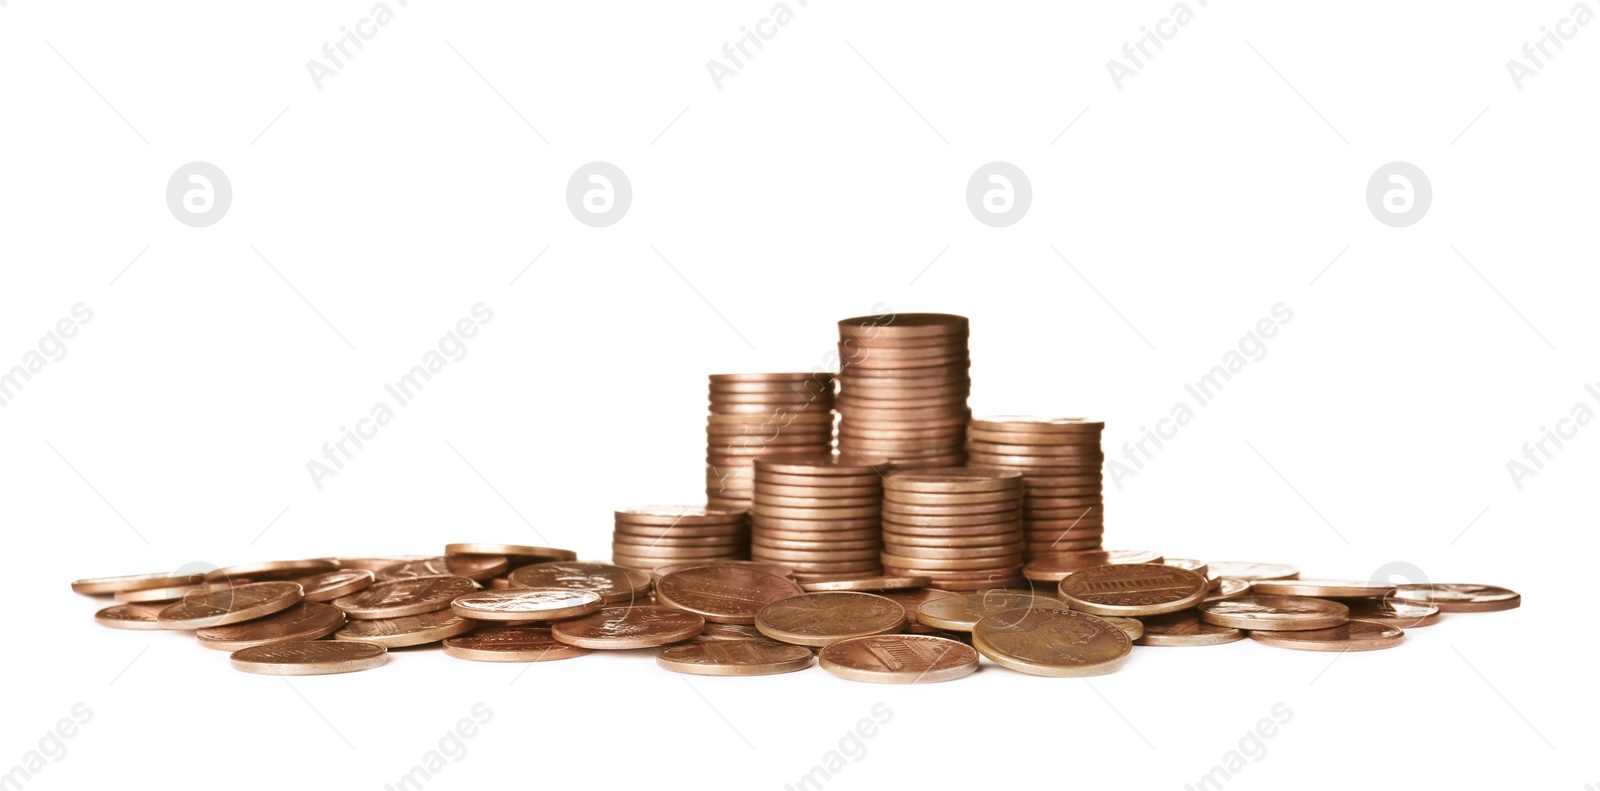 Photo of Pile and stacks of US coins isolated on white